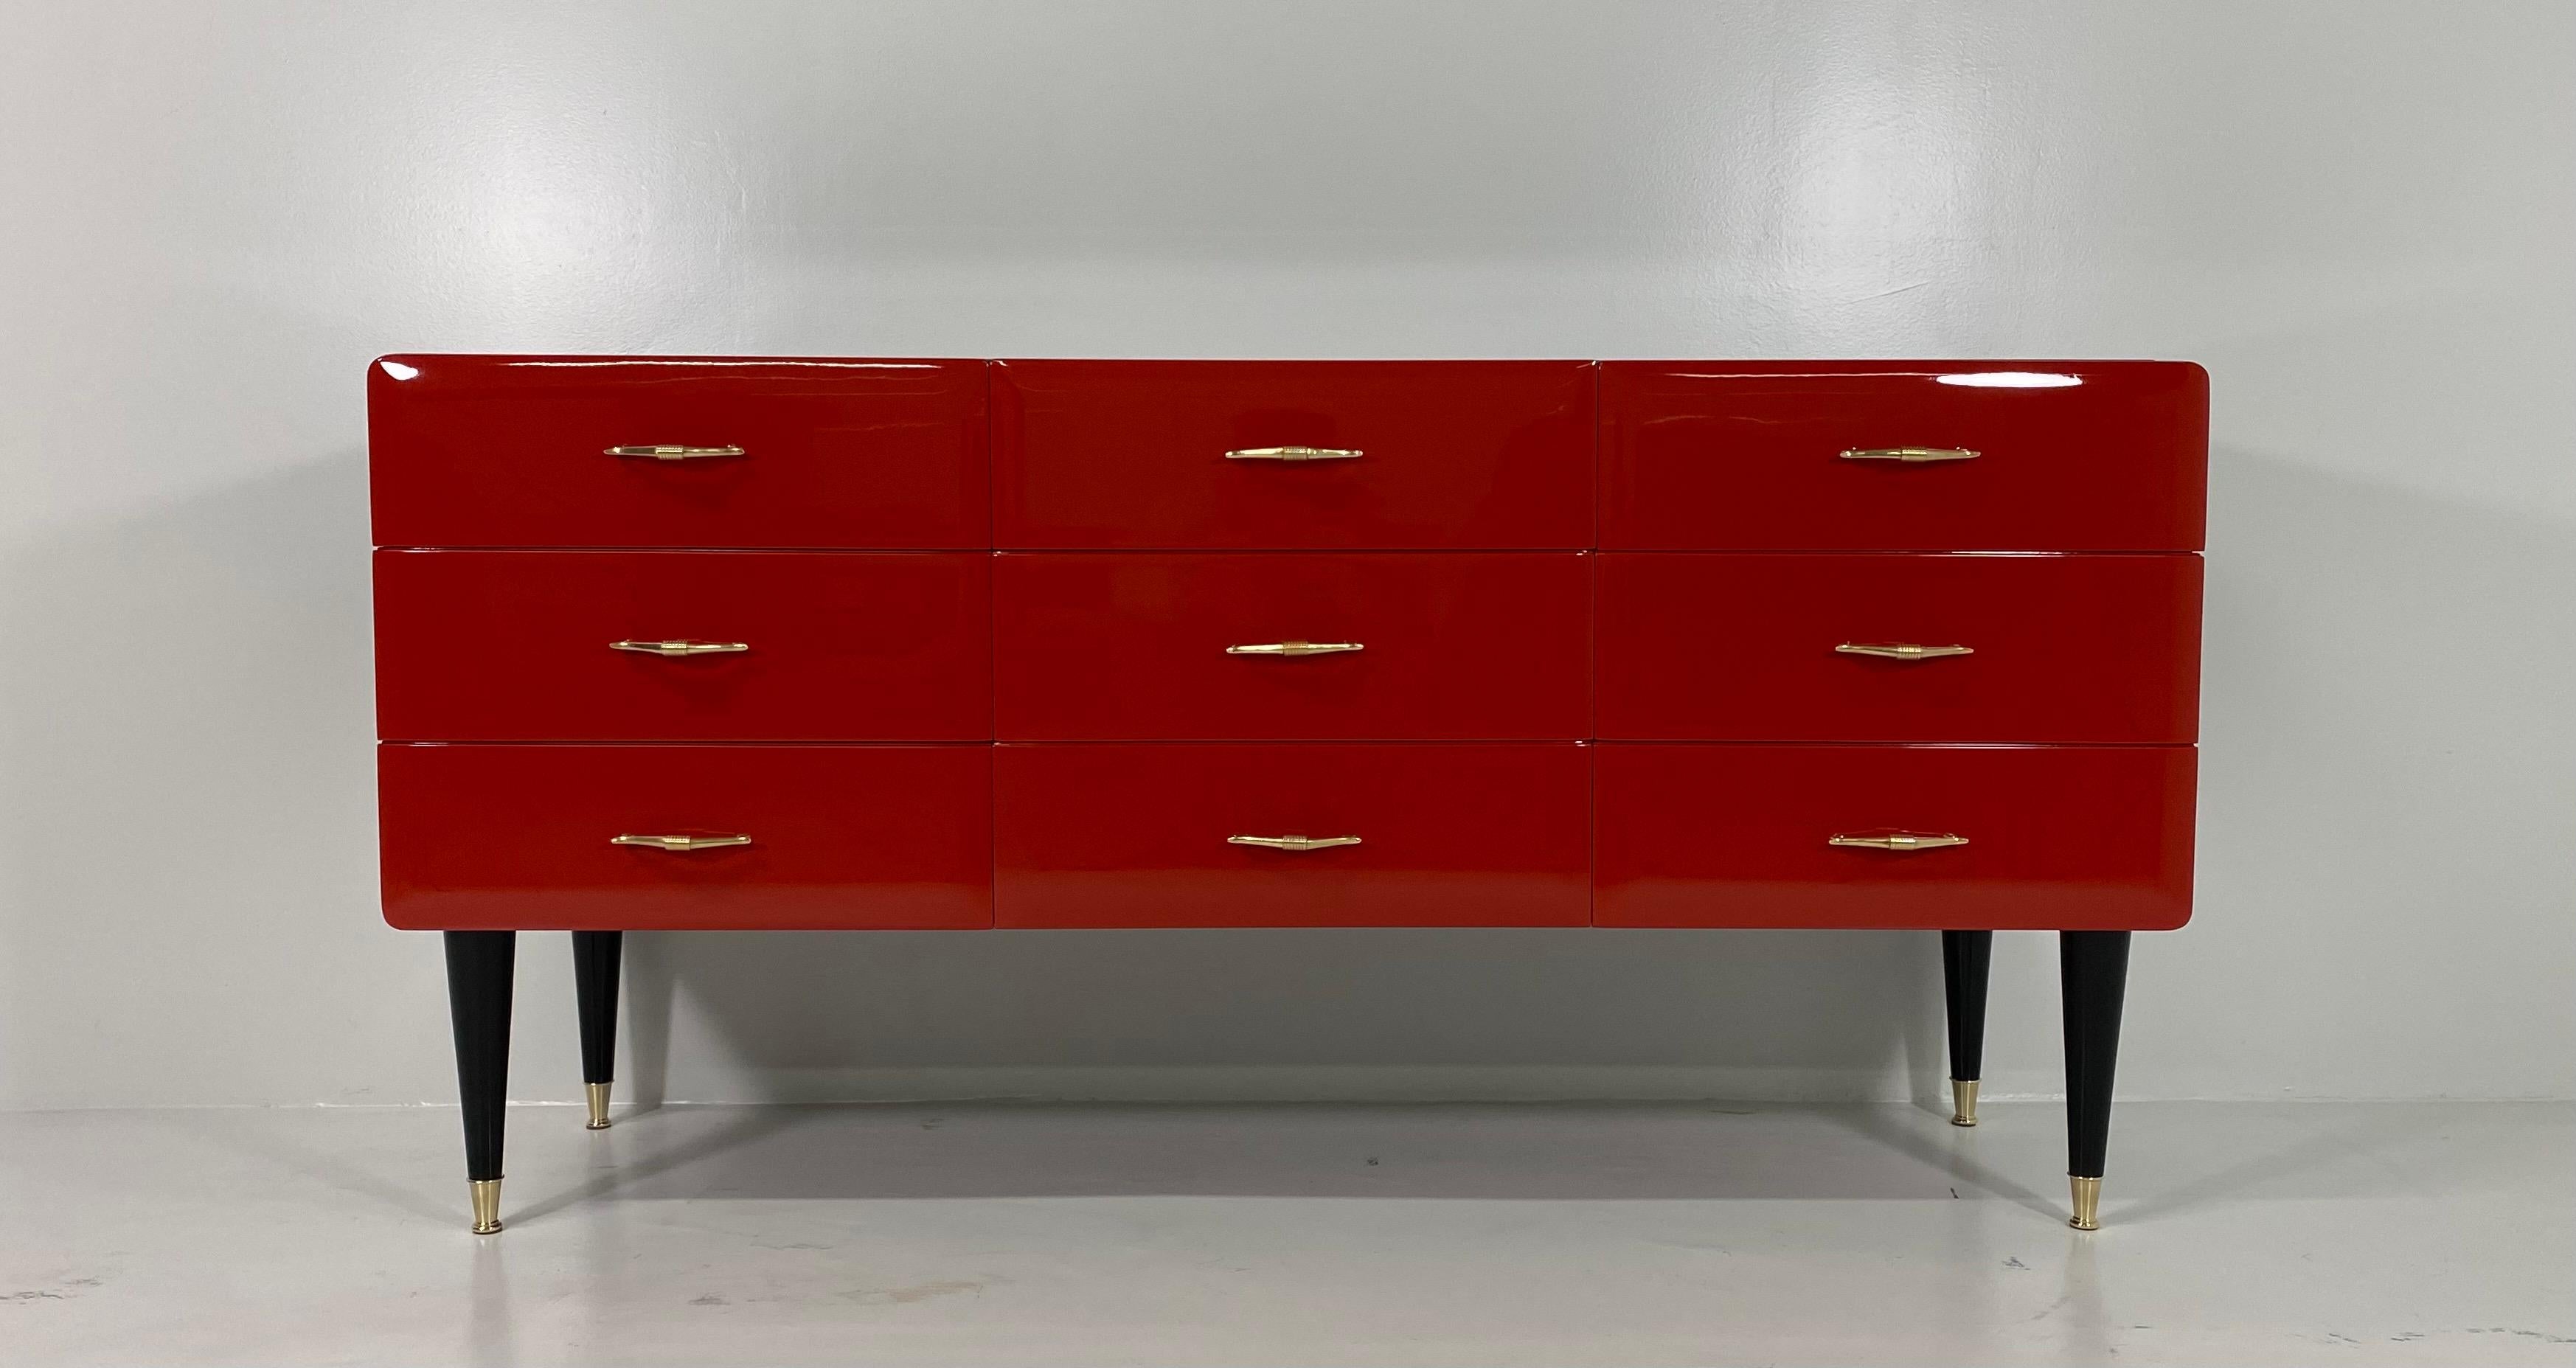 This rare chest of drawers was produced in Cantù in Italy in the late 40's most likely to a design by Gio Ponti.
The front of the drawers are lacquered with a special and unique red color while the legs and the structure are lacquered in